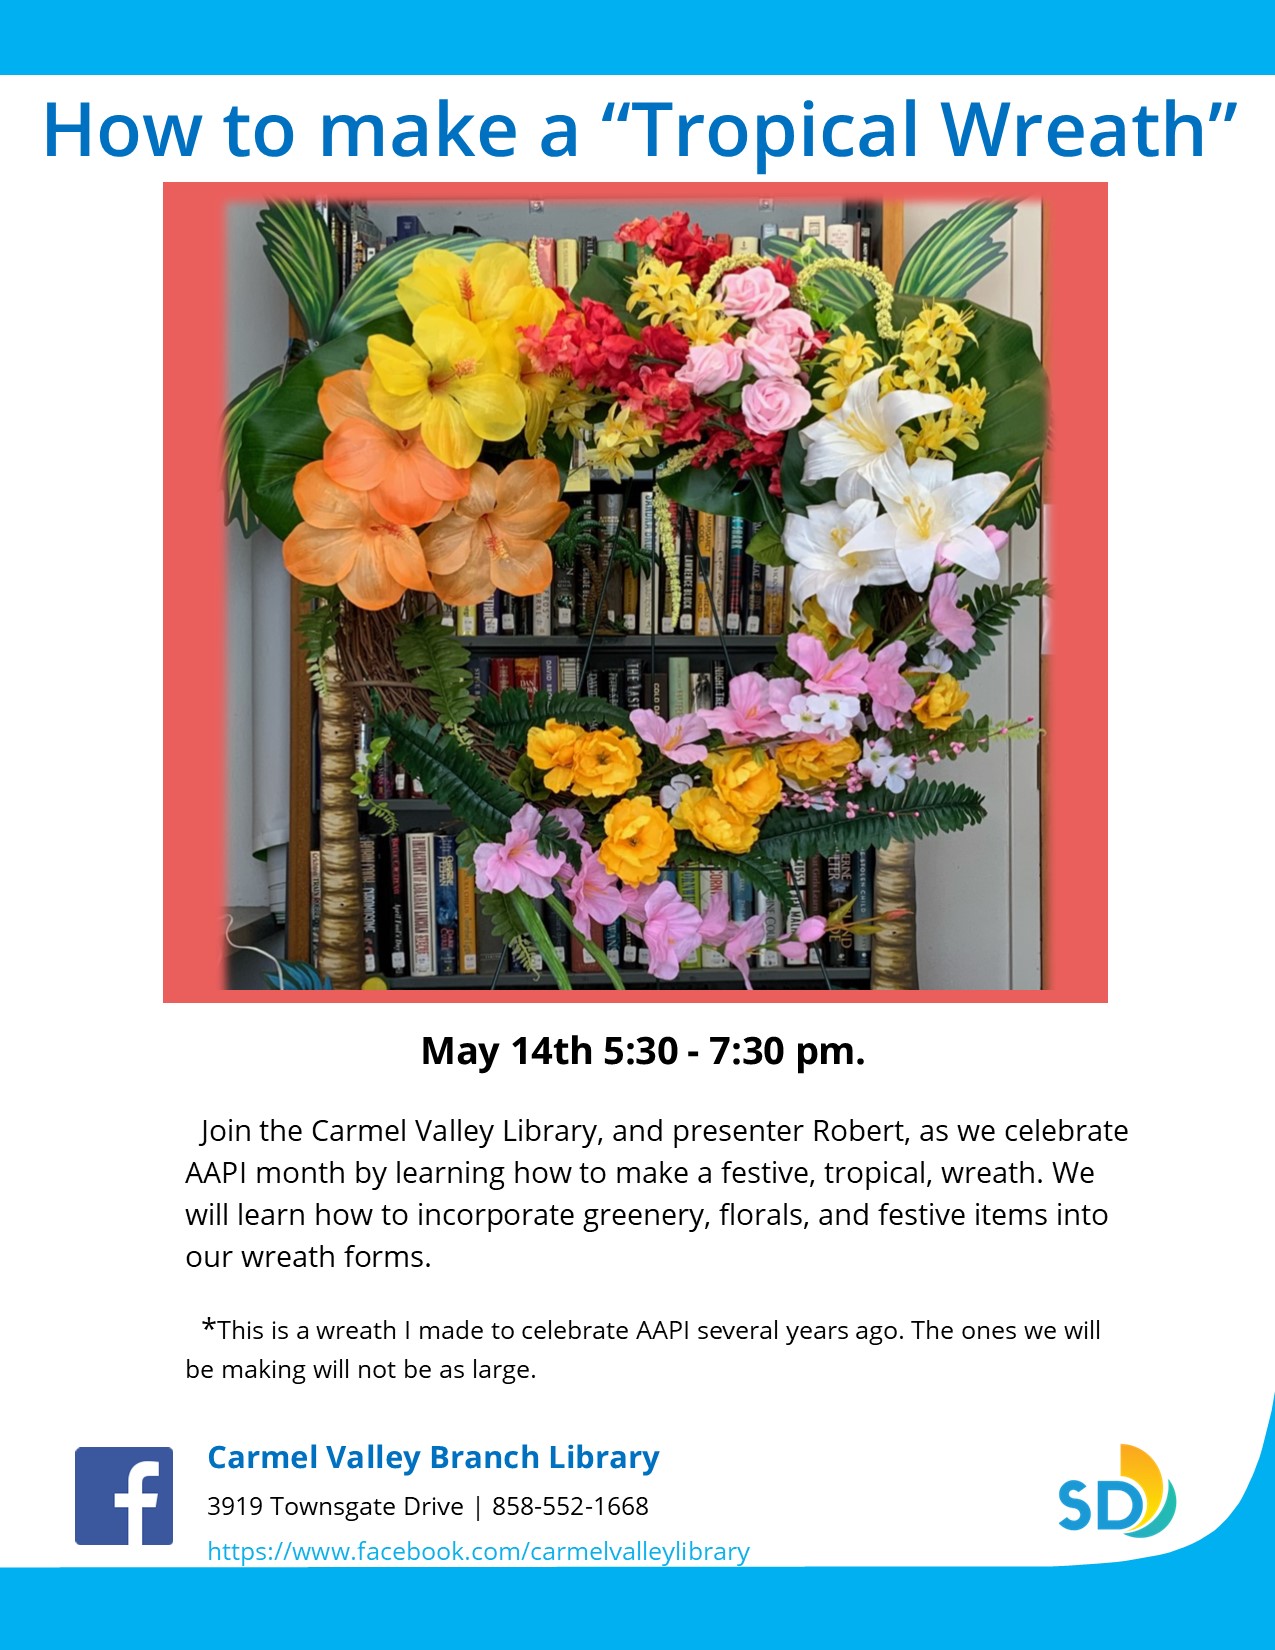 Join the Carmel Valley Library, and presenter Robert, as we celebrate AAPI month by learning how to make a festive, tropical, wreath. We will learn how to incorporate greenery, florals, and festive items into our wreath forms. 